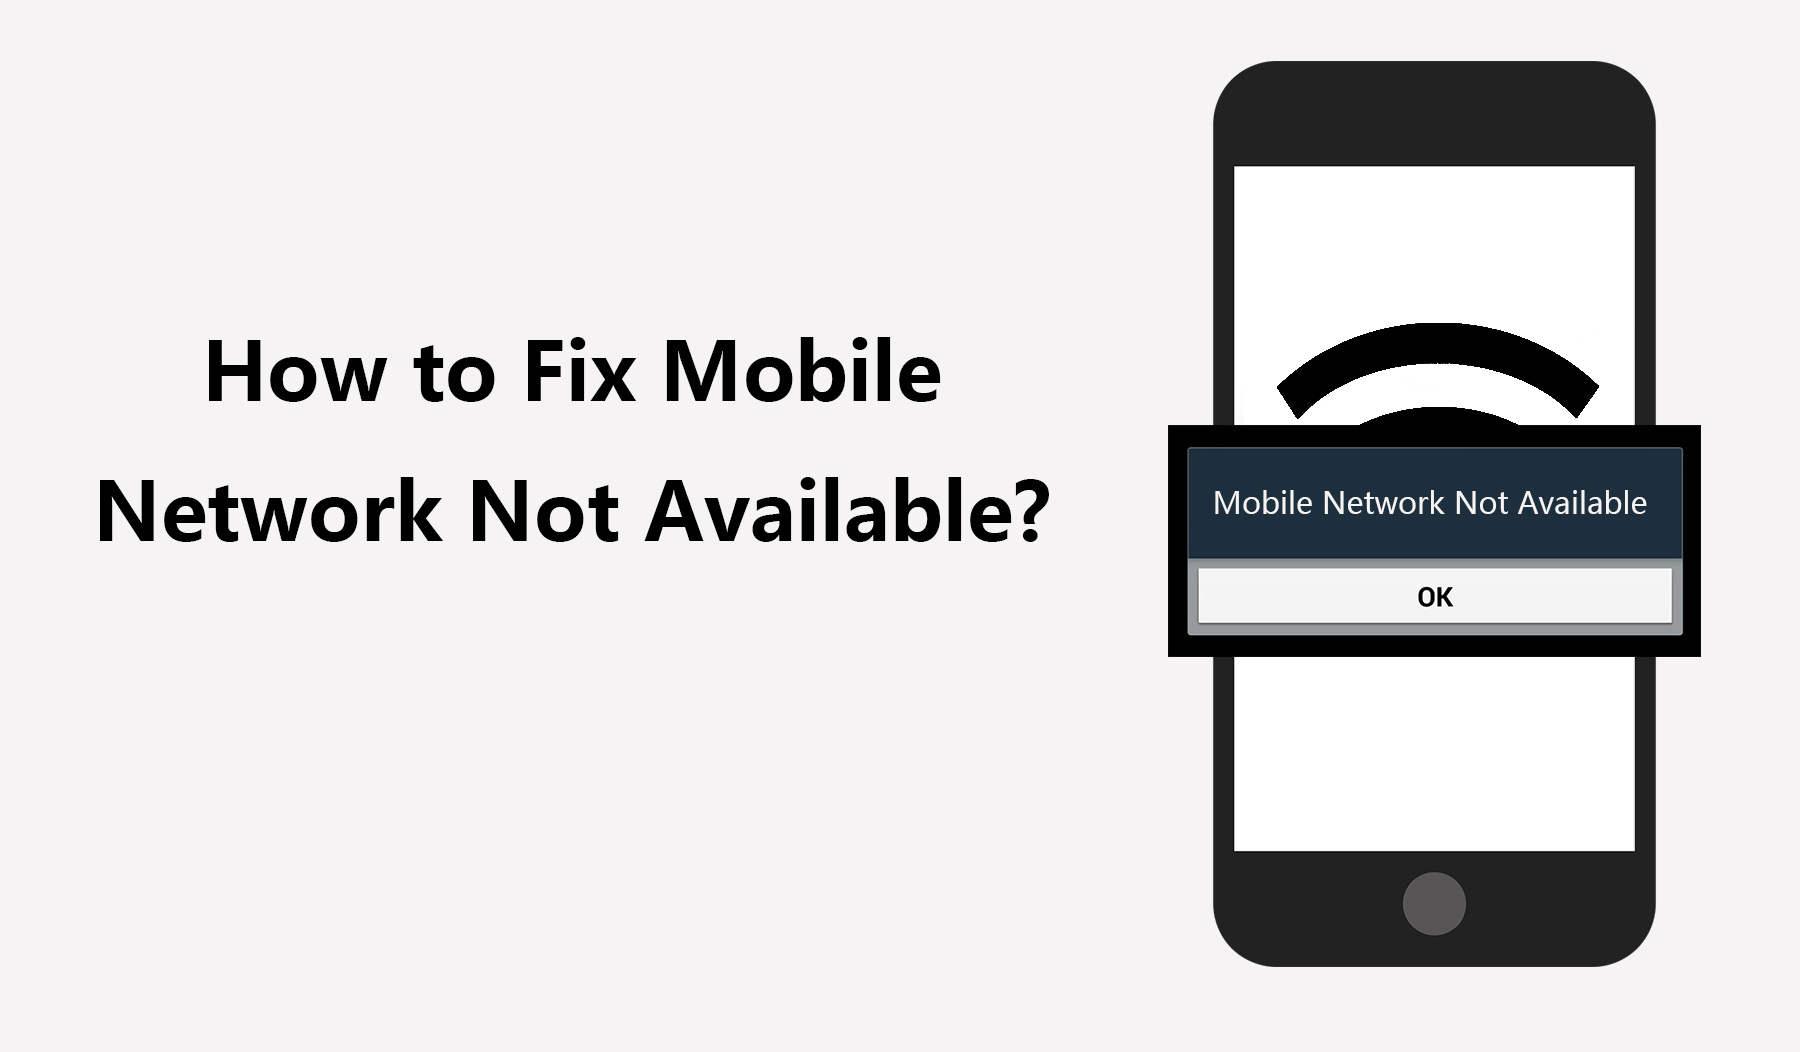 How to Fix Mobile Network Not Available